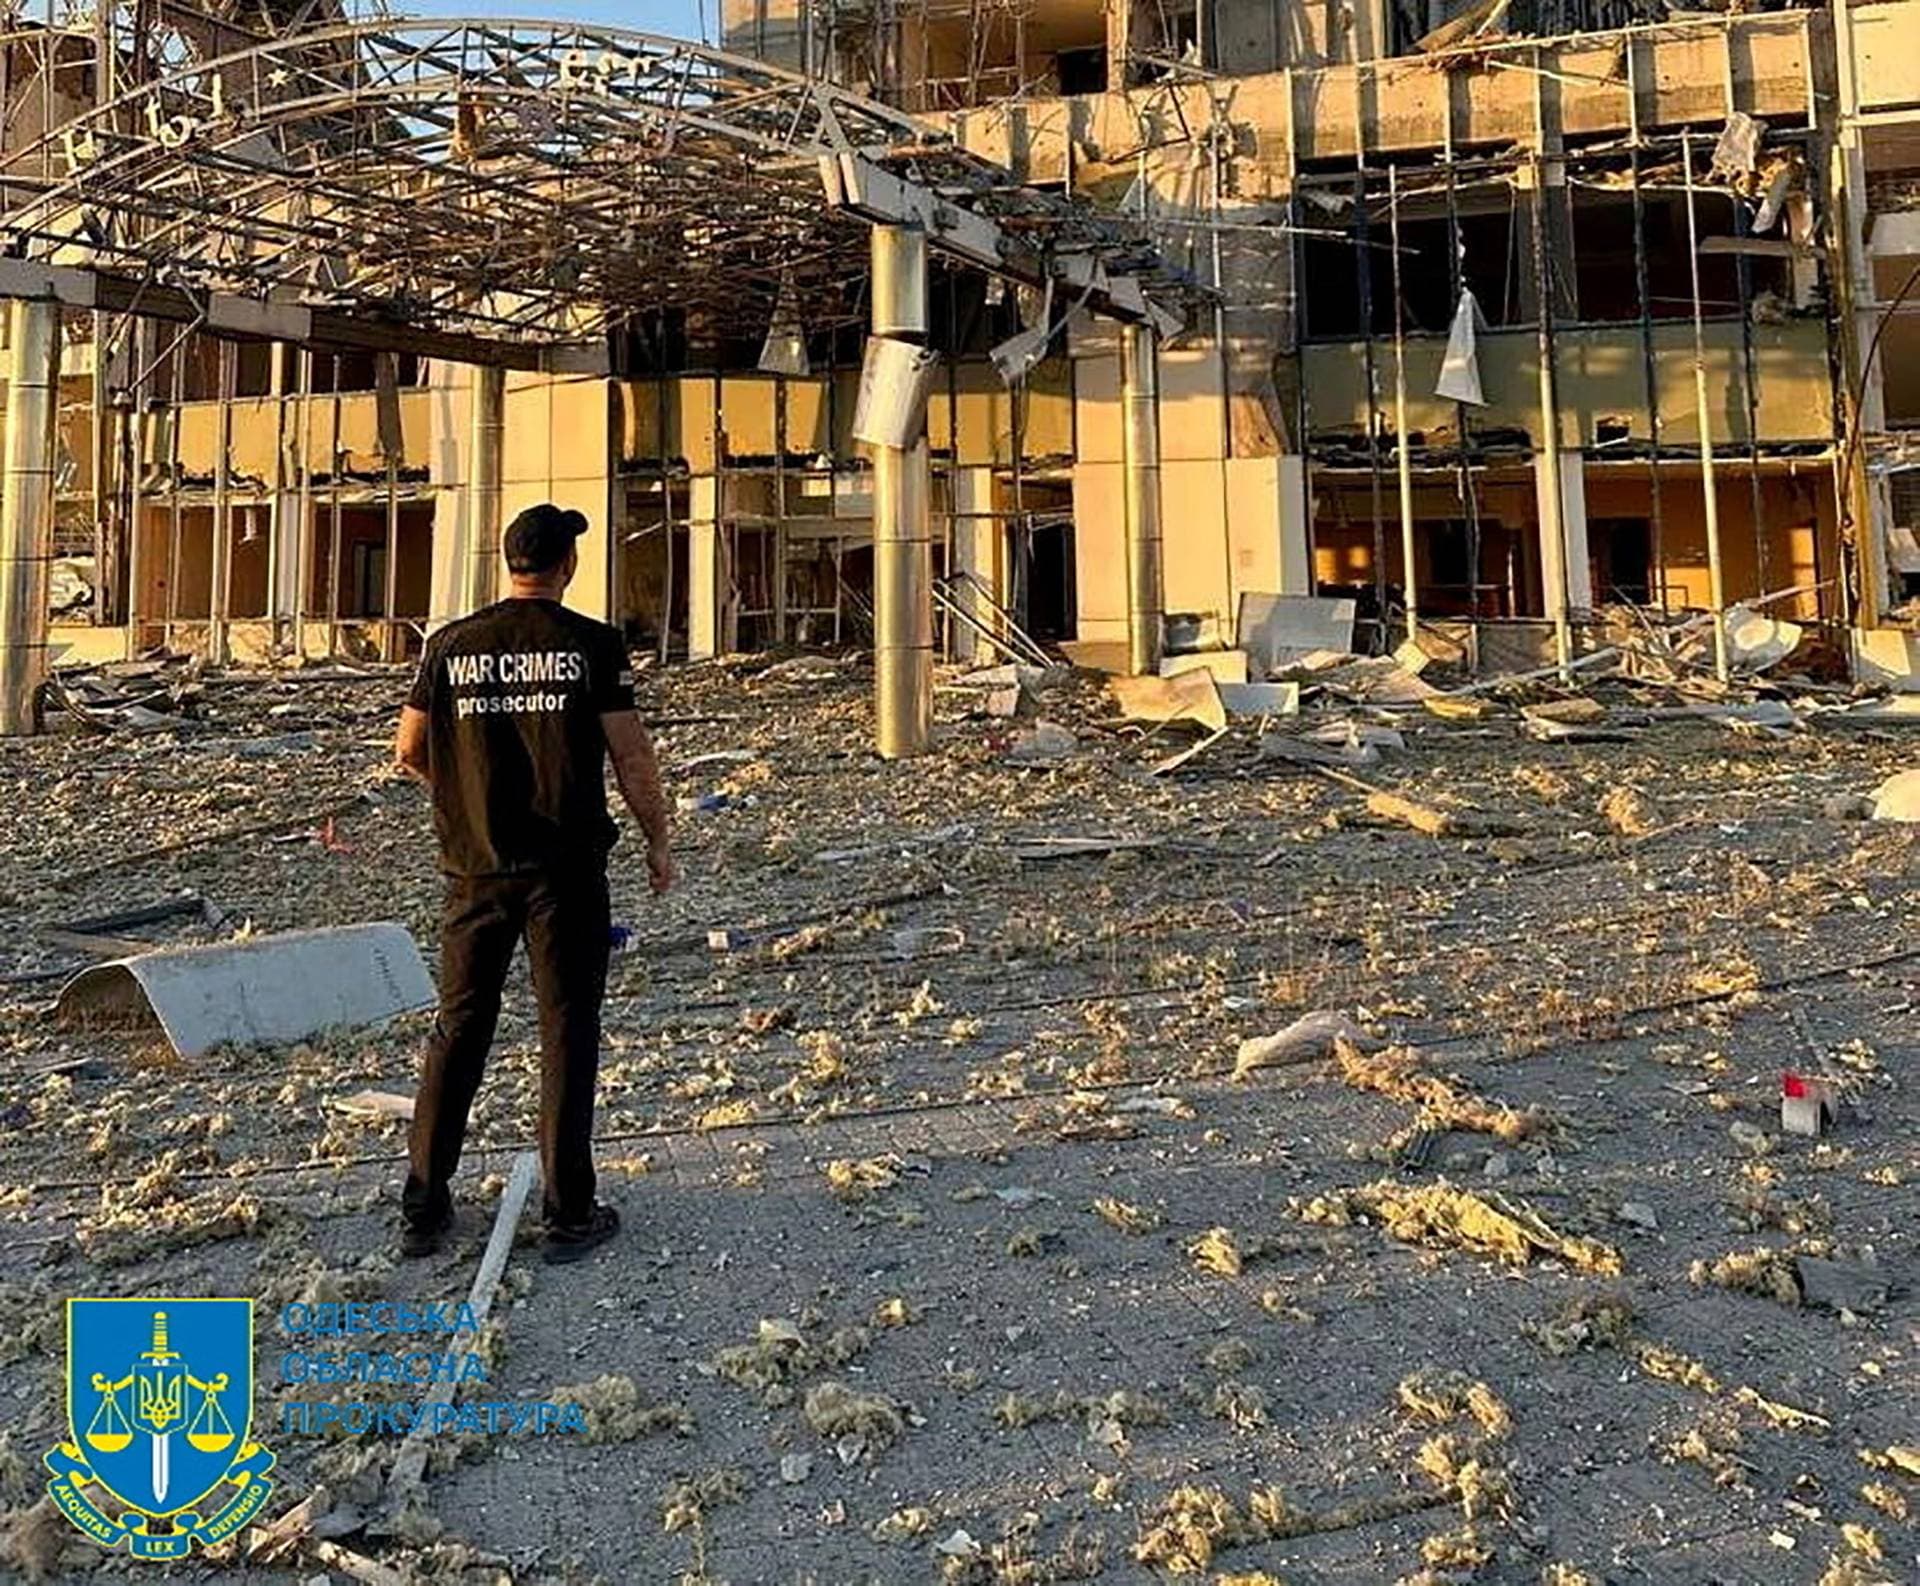 A member of Odesa Regional Prosecutor's Office personnel inspects damage following a Russian military attack in Odesa